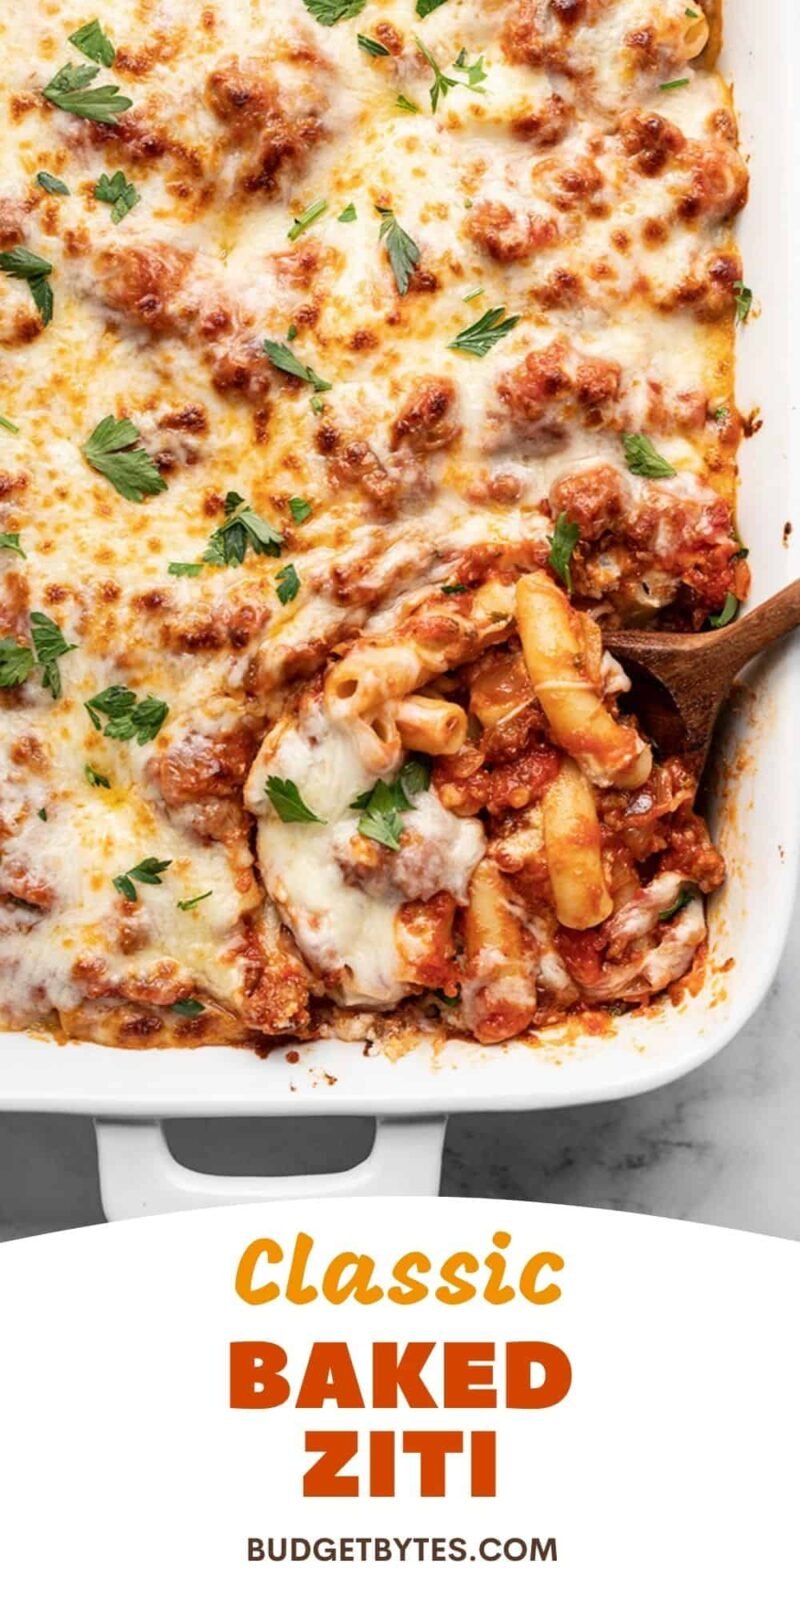 Close up overhead view of baked ziti being scooped from dish, title text at the bottom